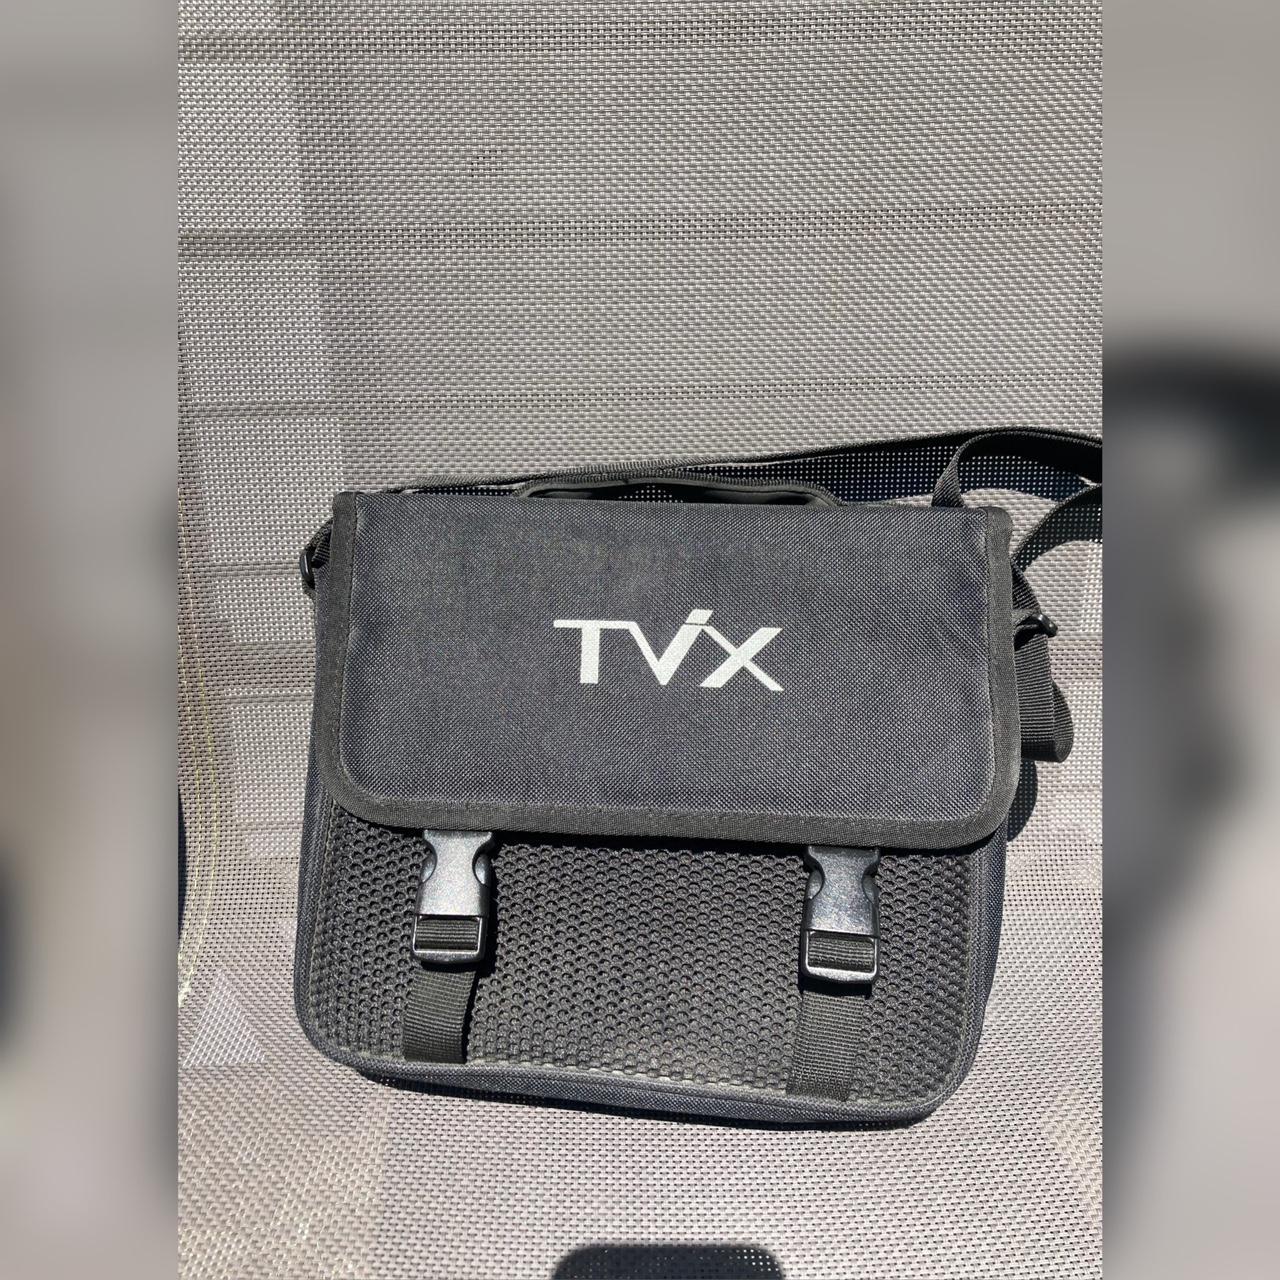 Product Image 1 - TVX Cross Body

-10/10 condition 
-light